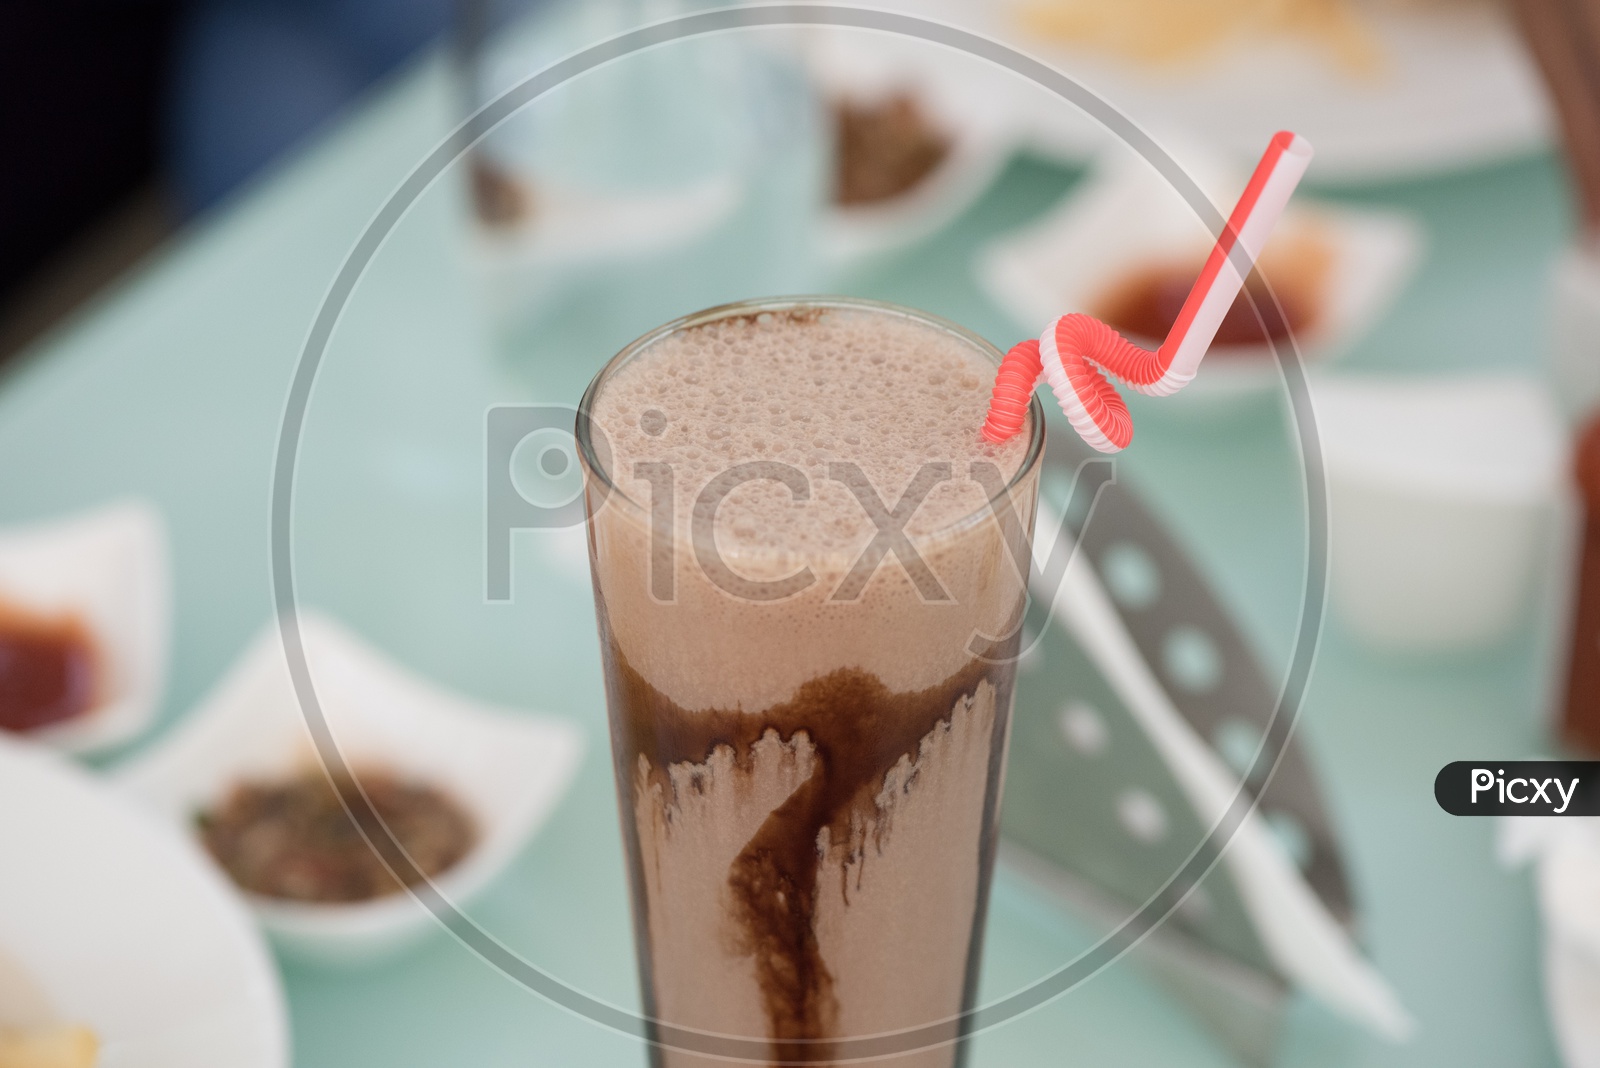 Cold Coffee Served At a Restaurant Table Background